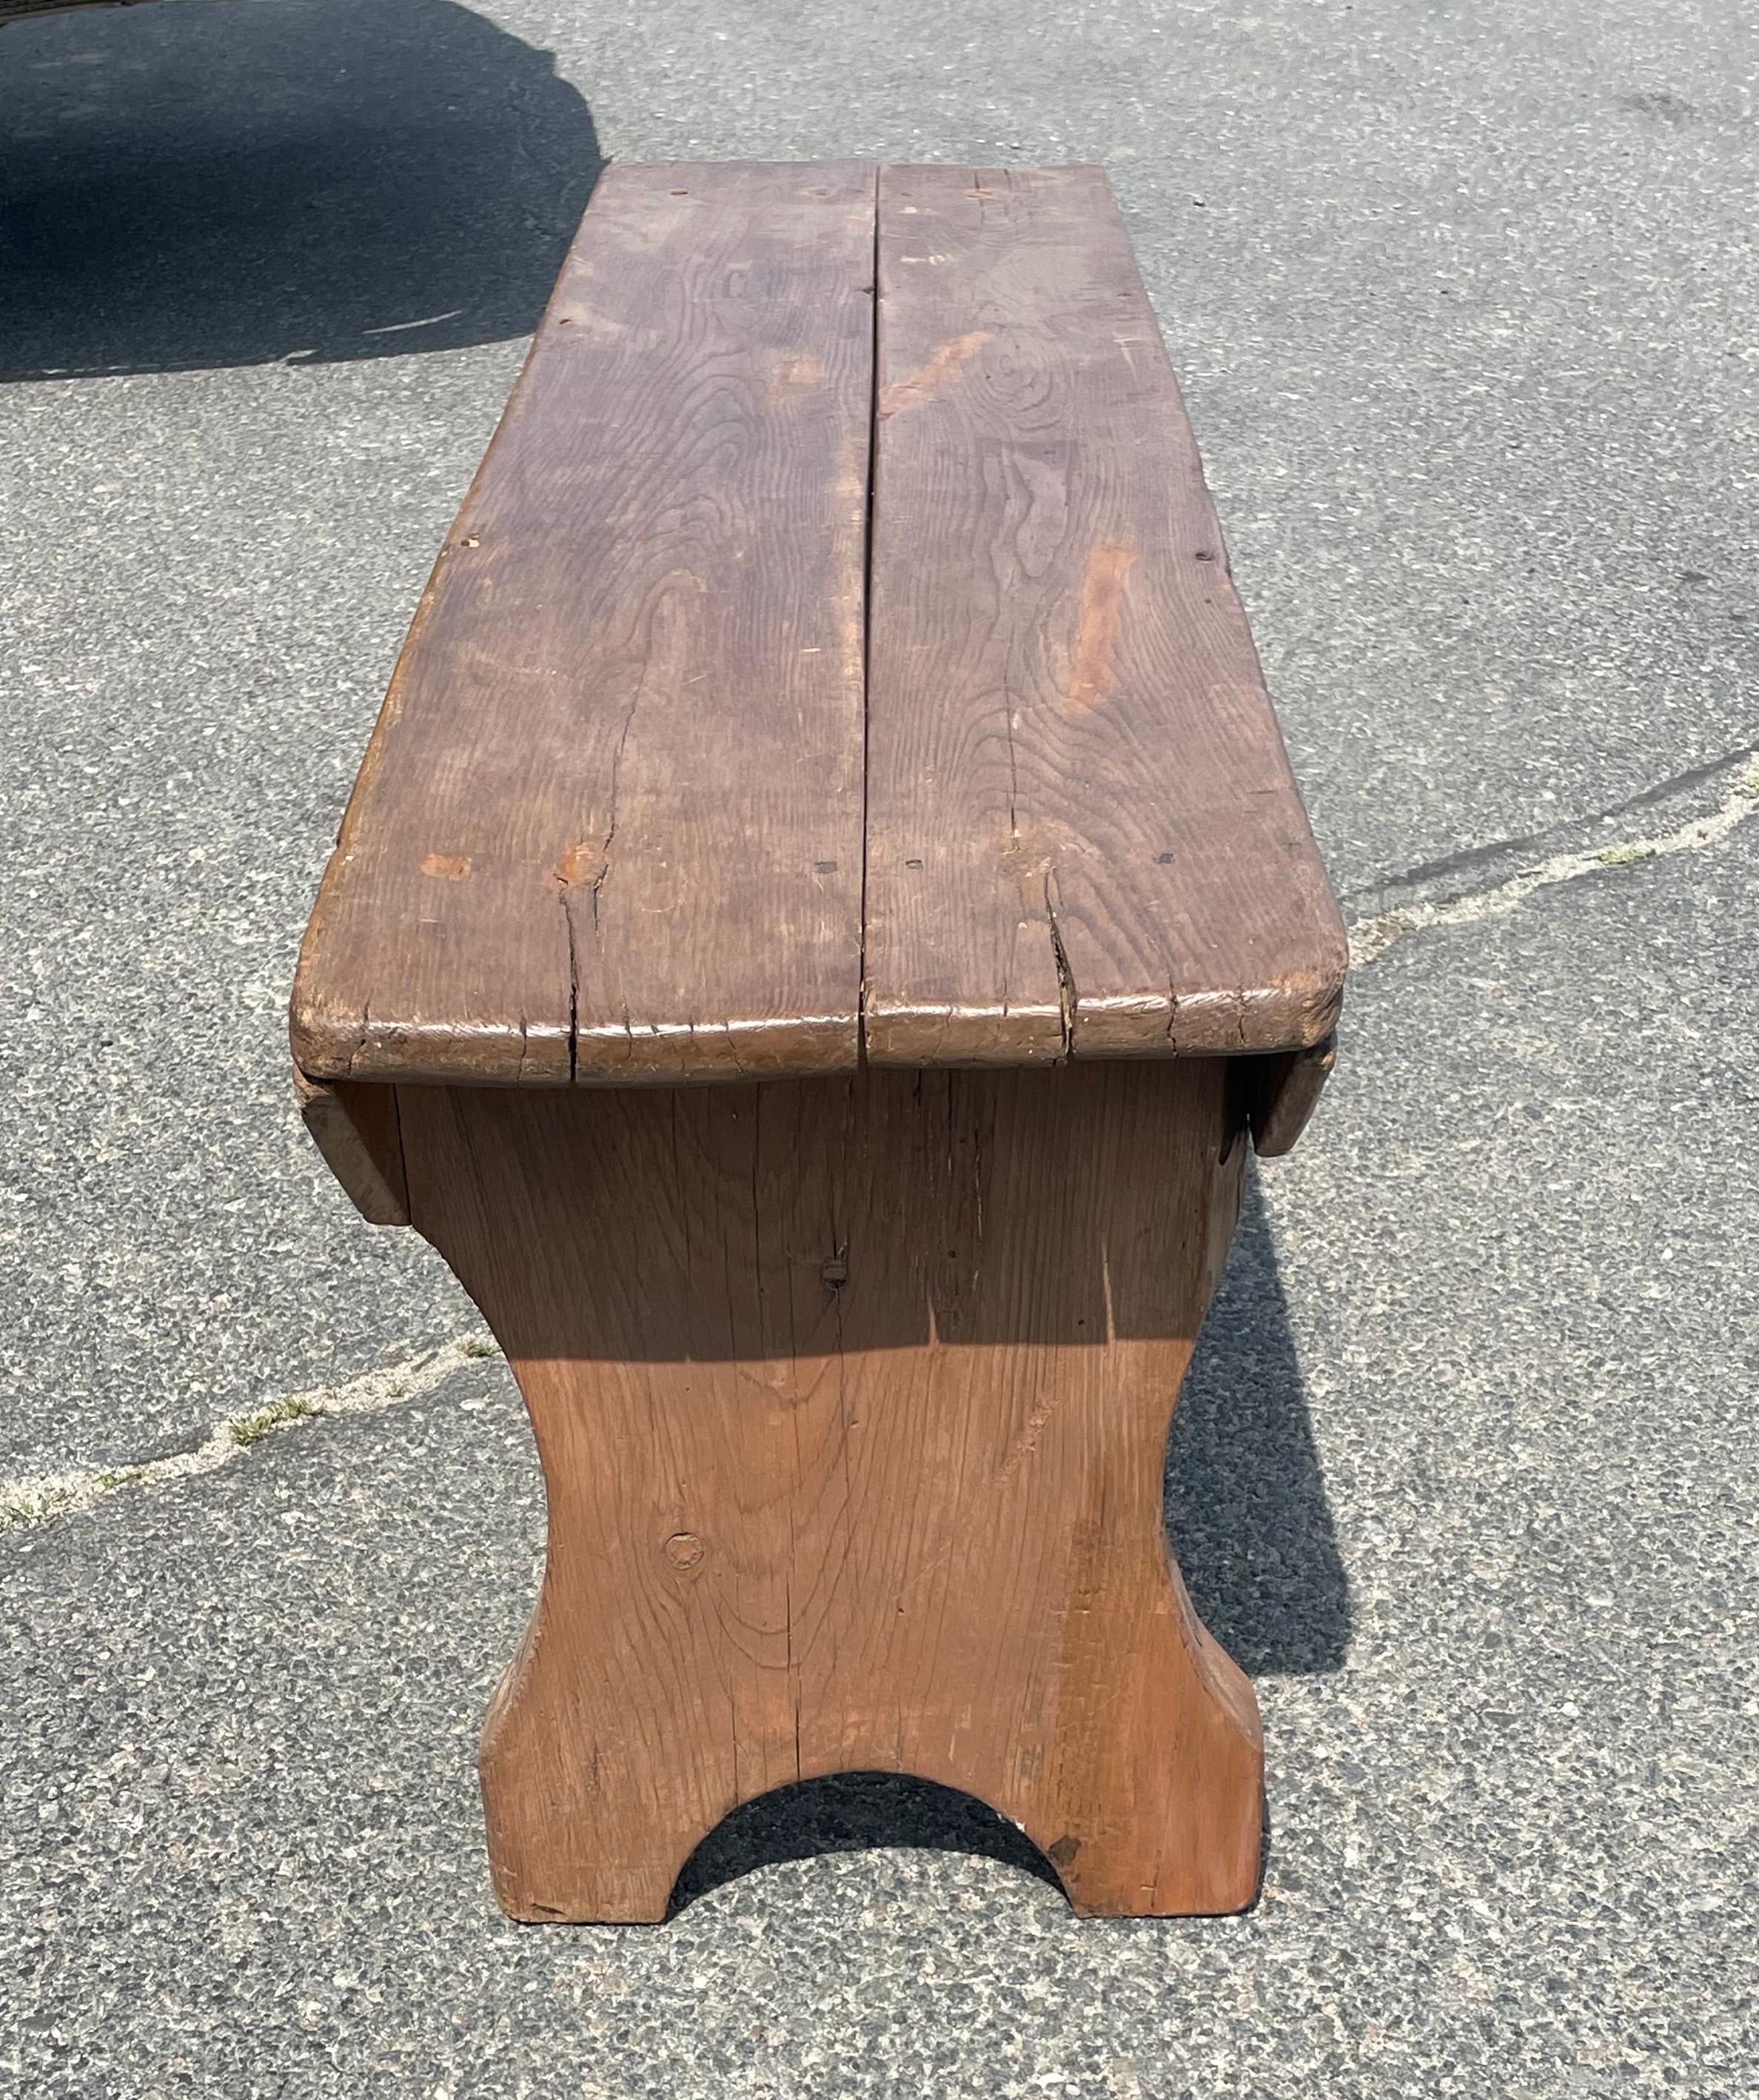 19th Century Wooden Bench in Brown Paint In Fair Condition For Sale In Nantucket, MA